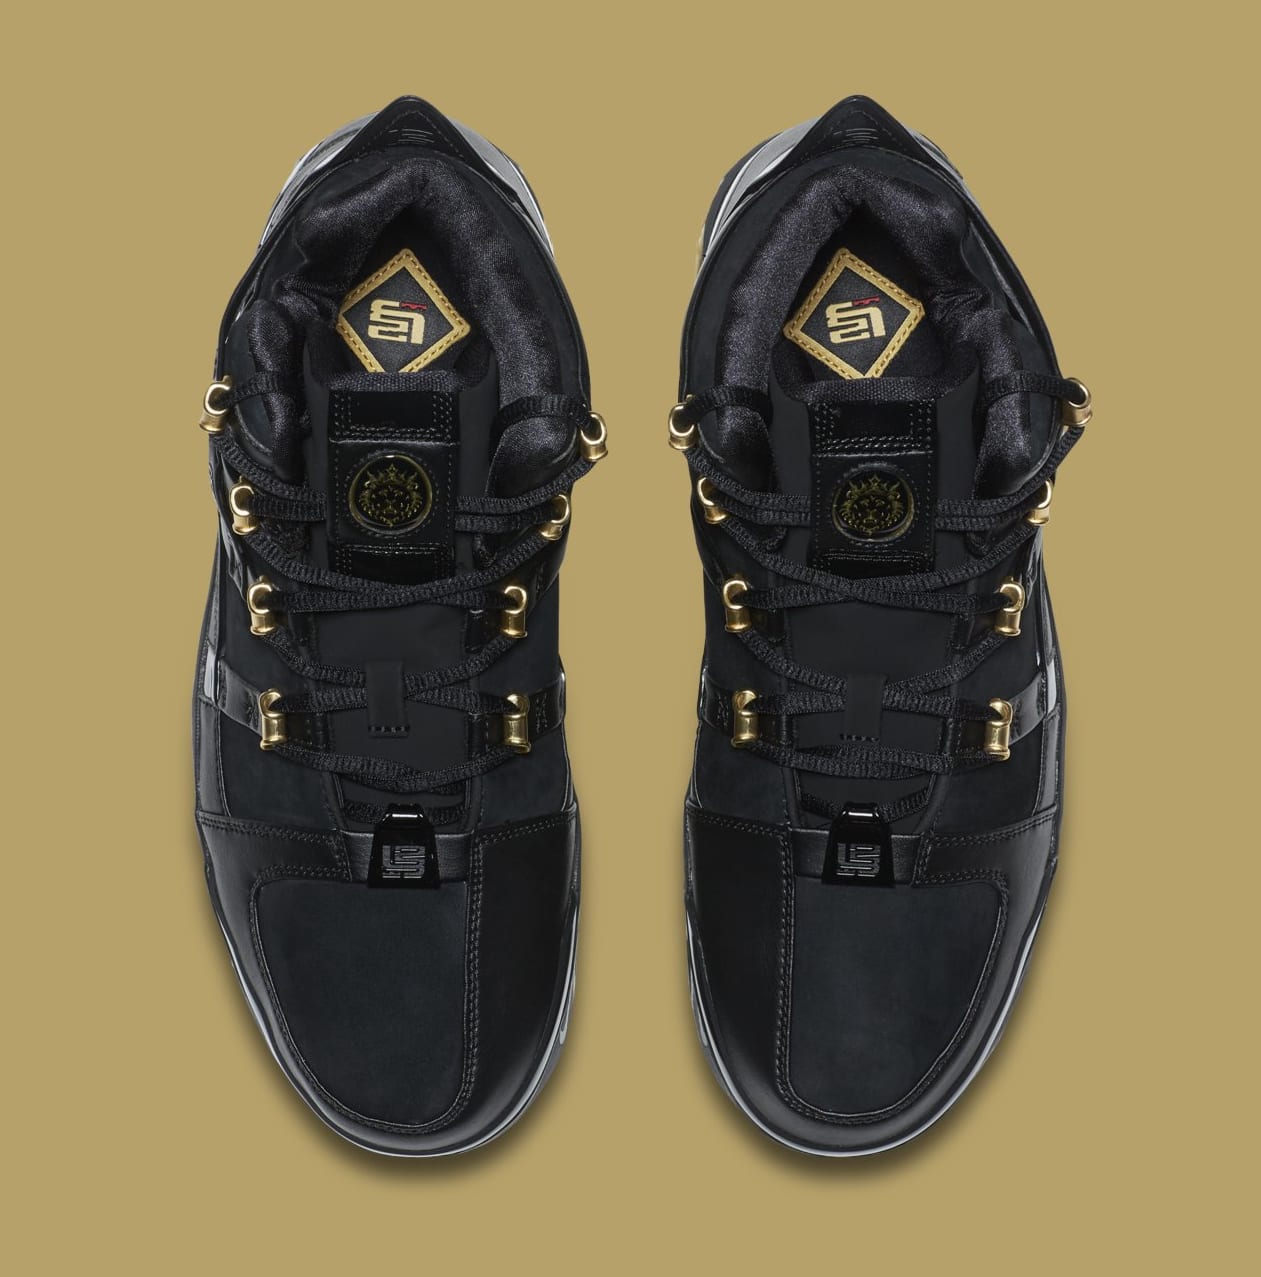 lebron black and gold